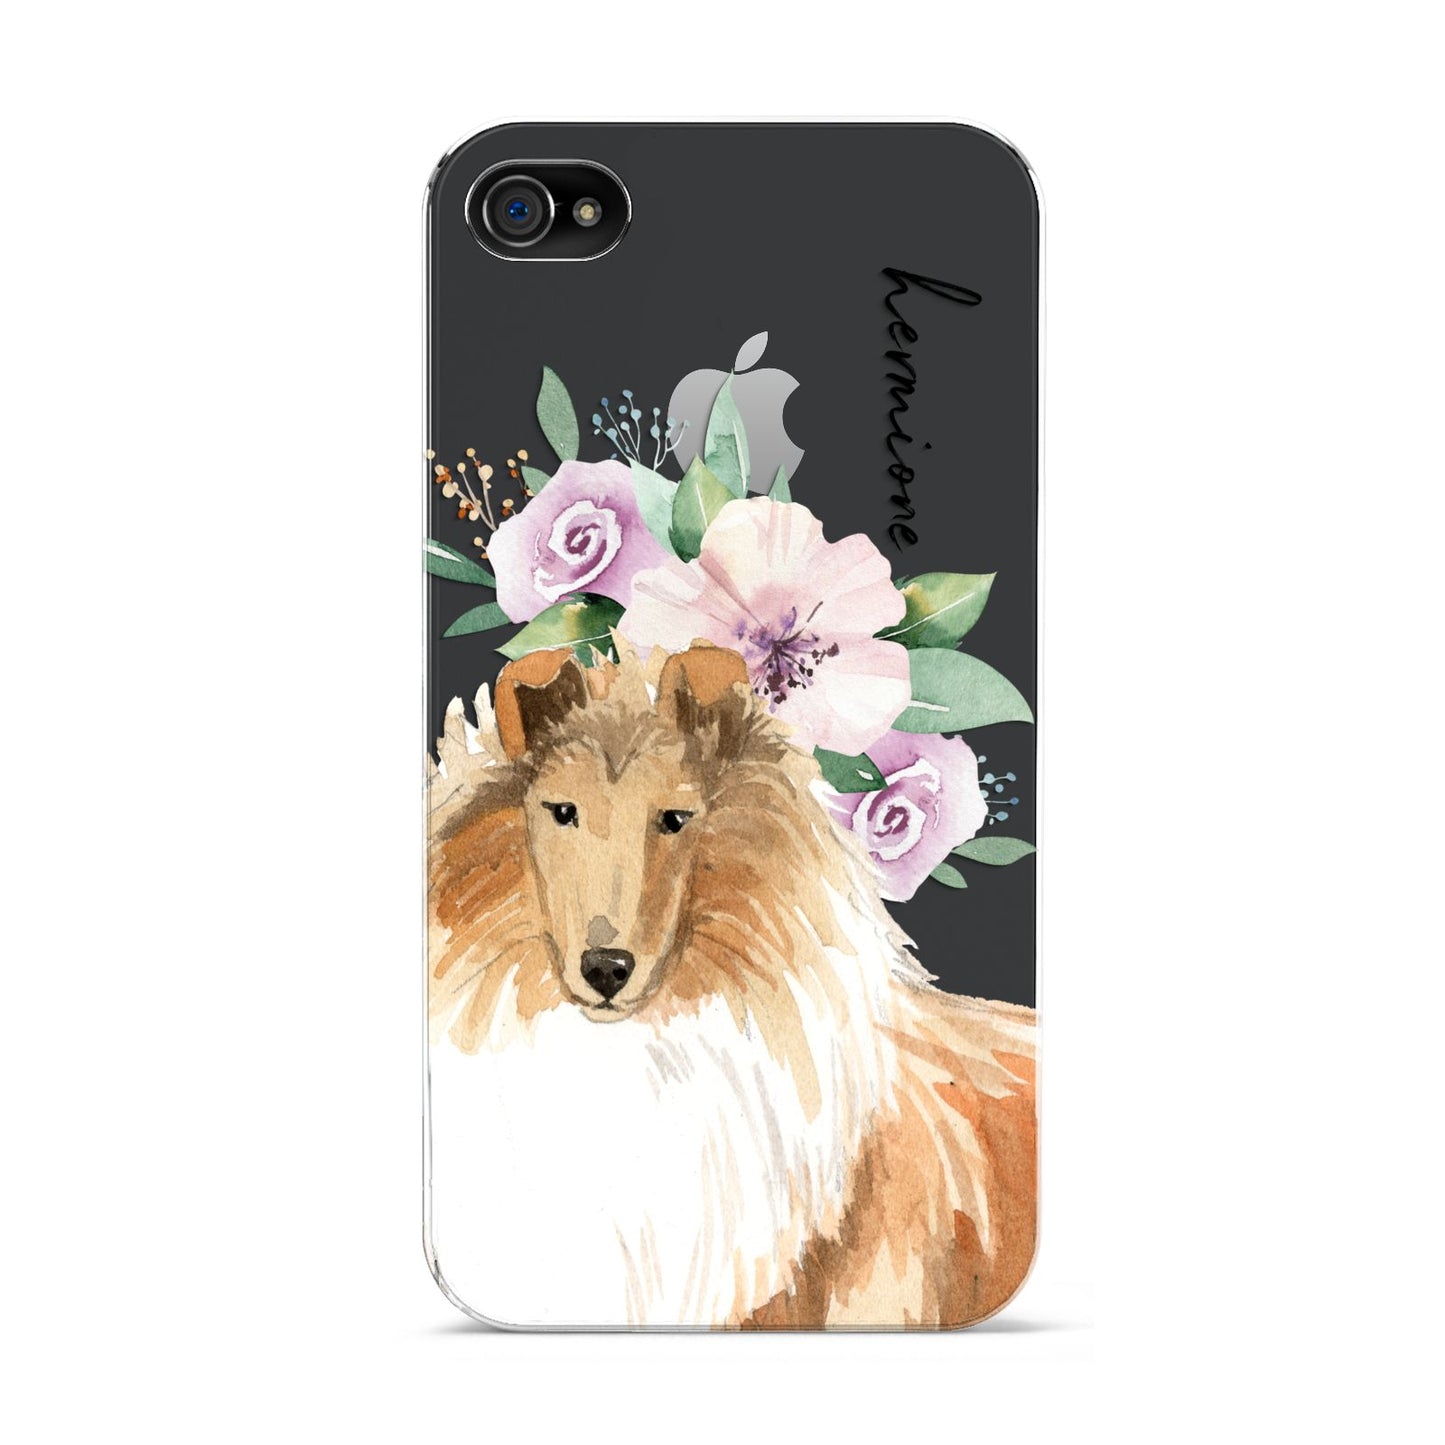 Personalised Rough Collie Apple iPhone 4s Case